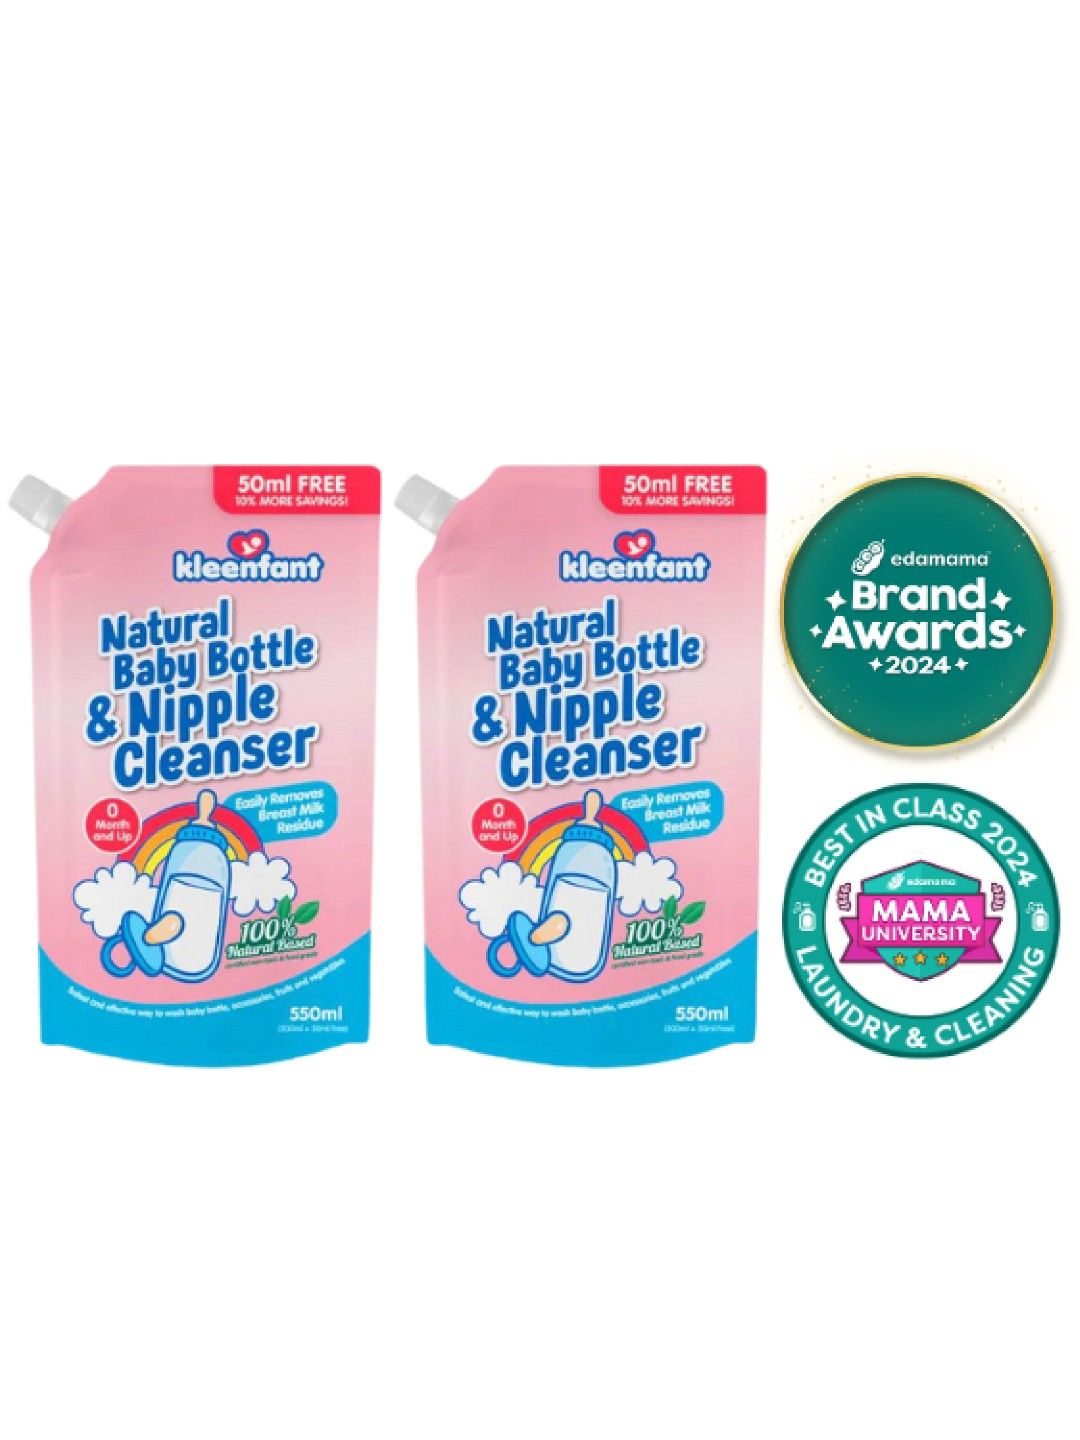 Kleenfant Natural Baby Bottle and Nipple Cleanser (550ml) Pack of 2